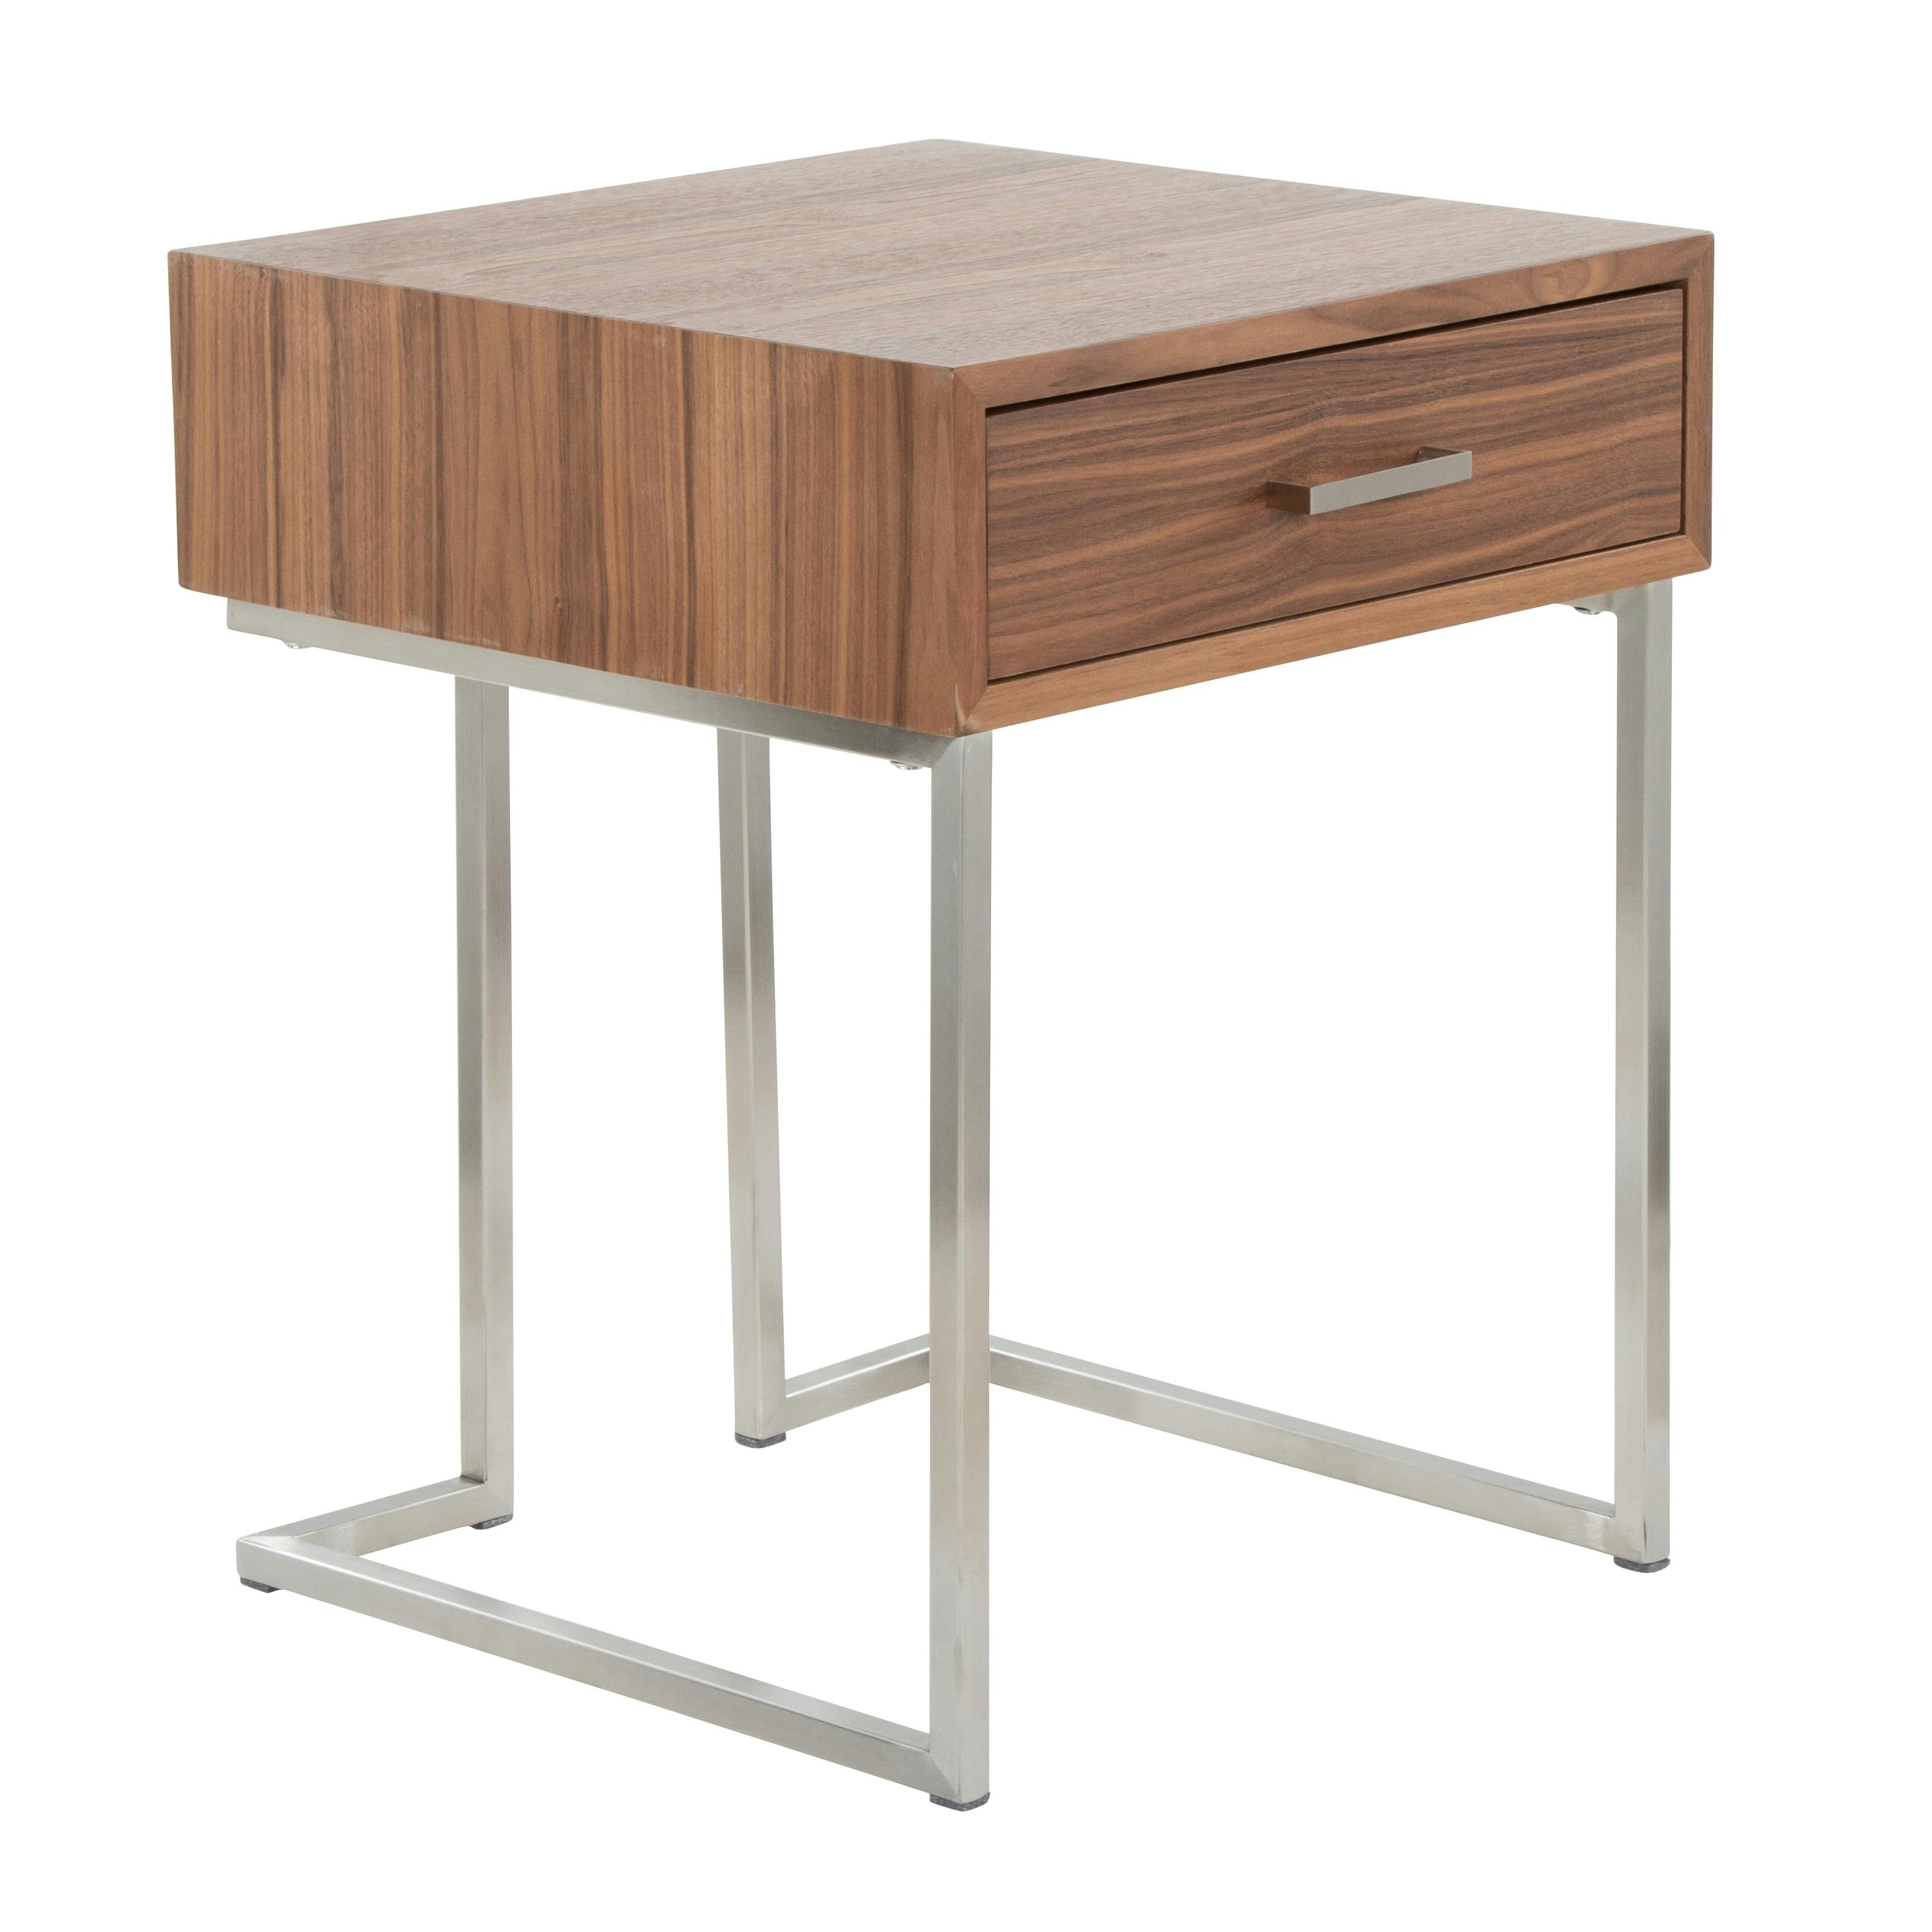 Modern Walnut Wood & Stainless Steel Square End Table with Drawer